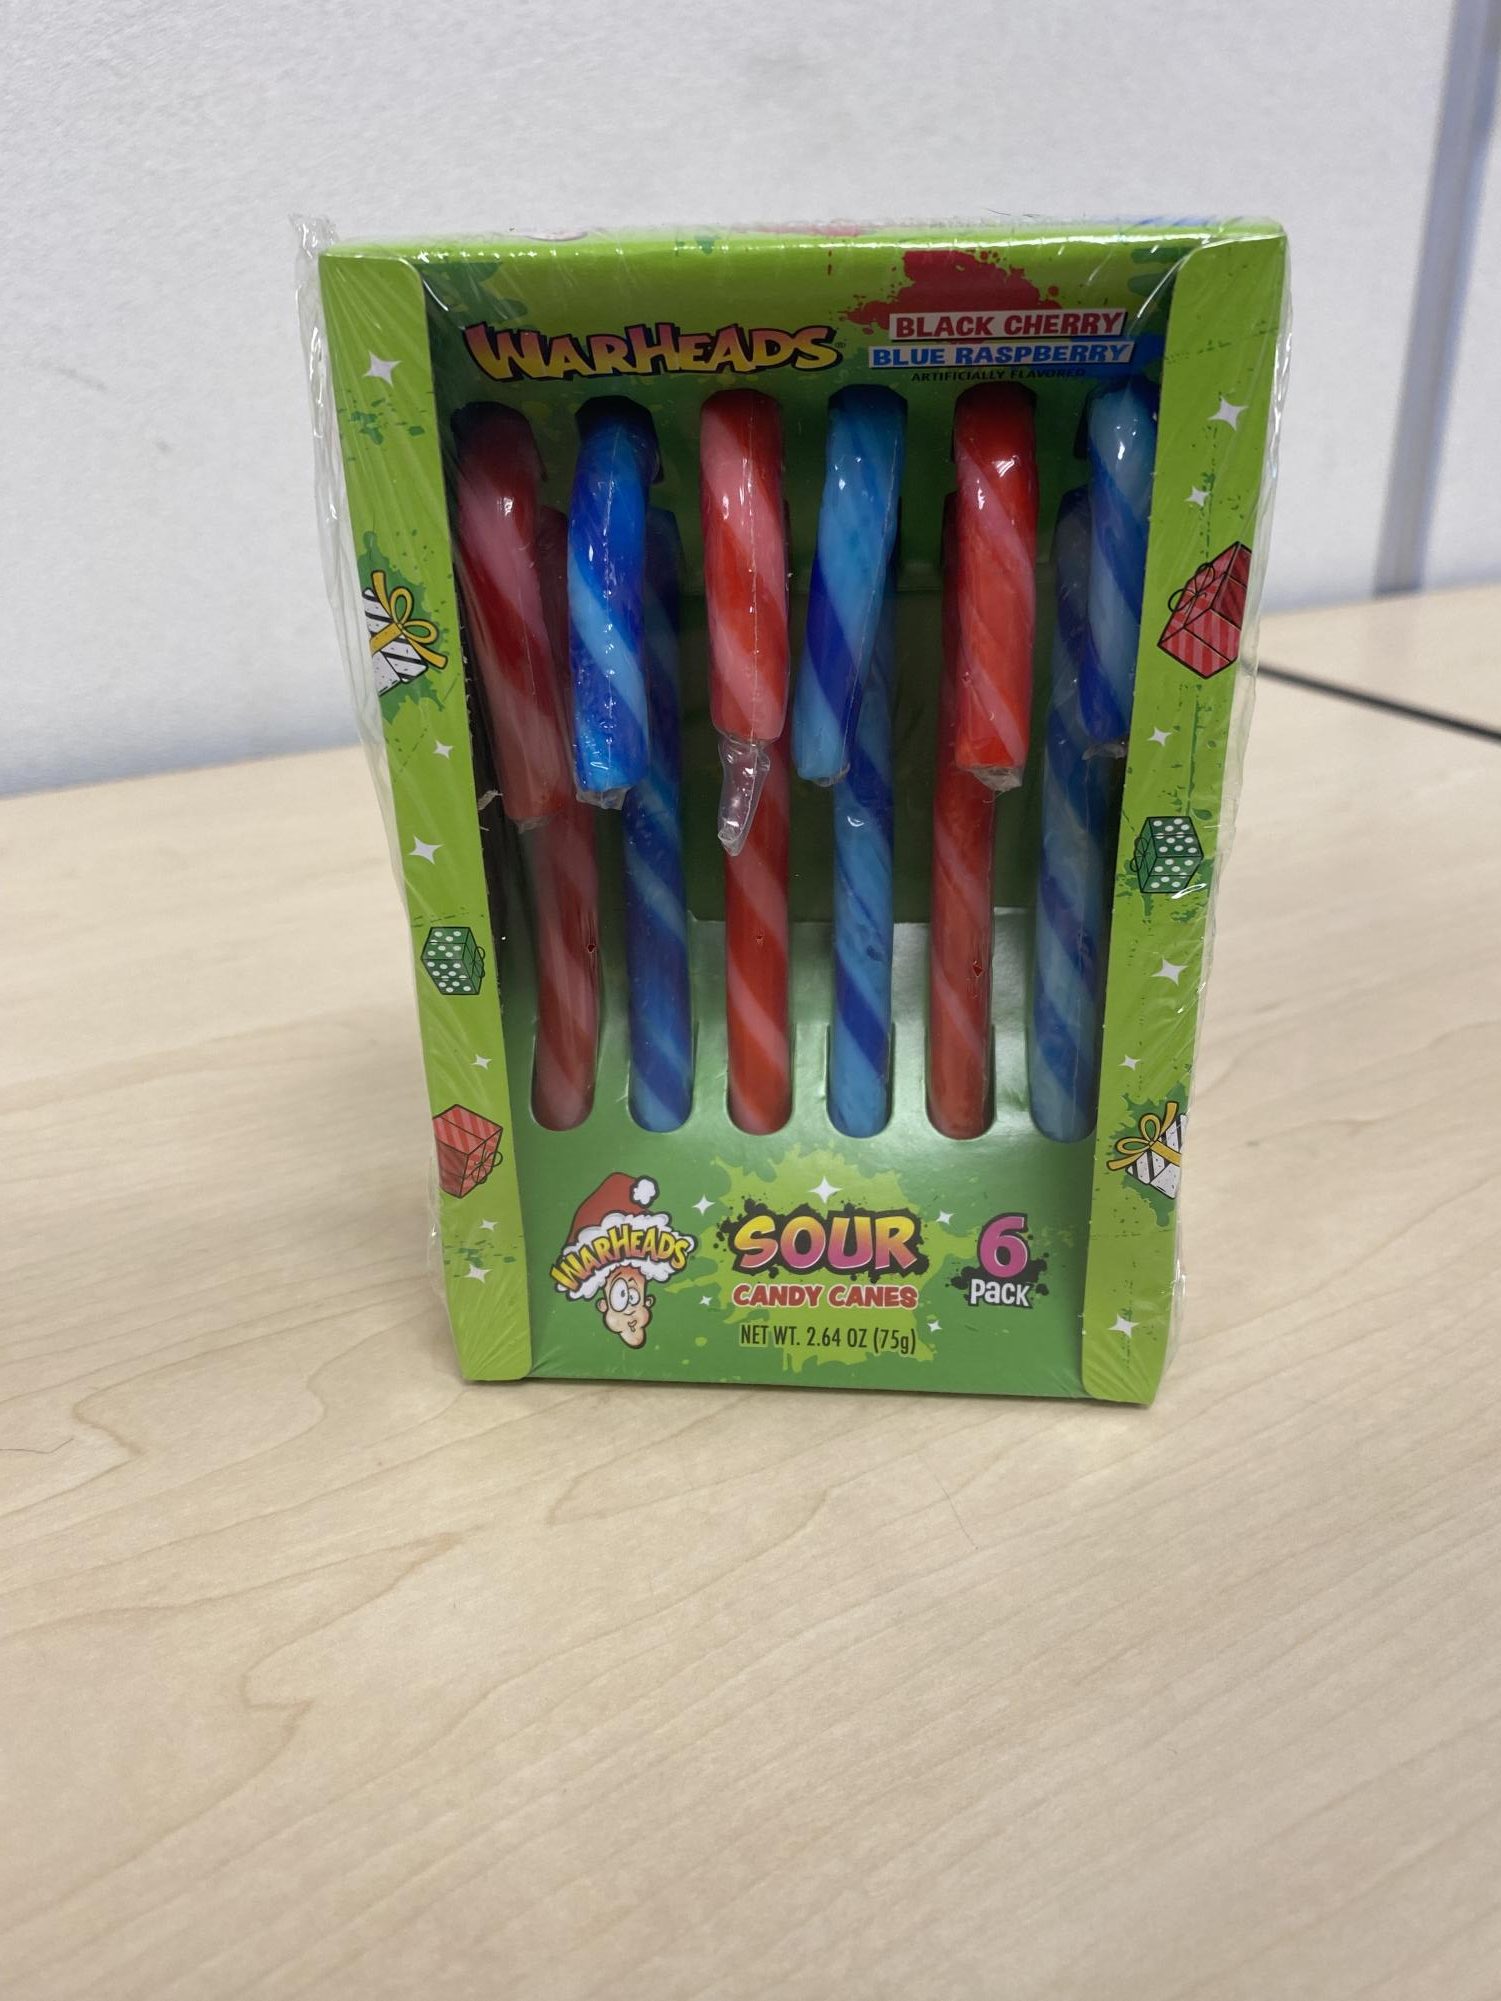 Warheads candy canes